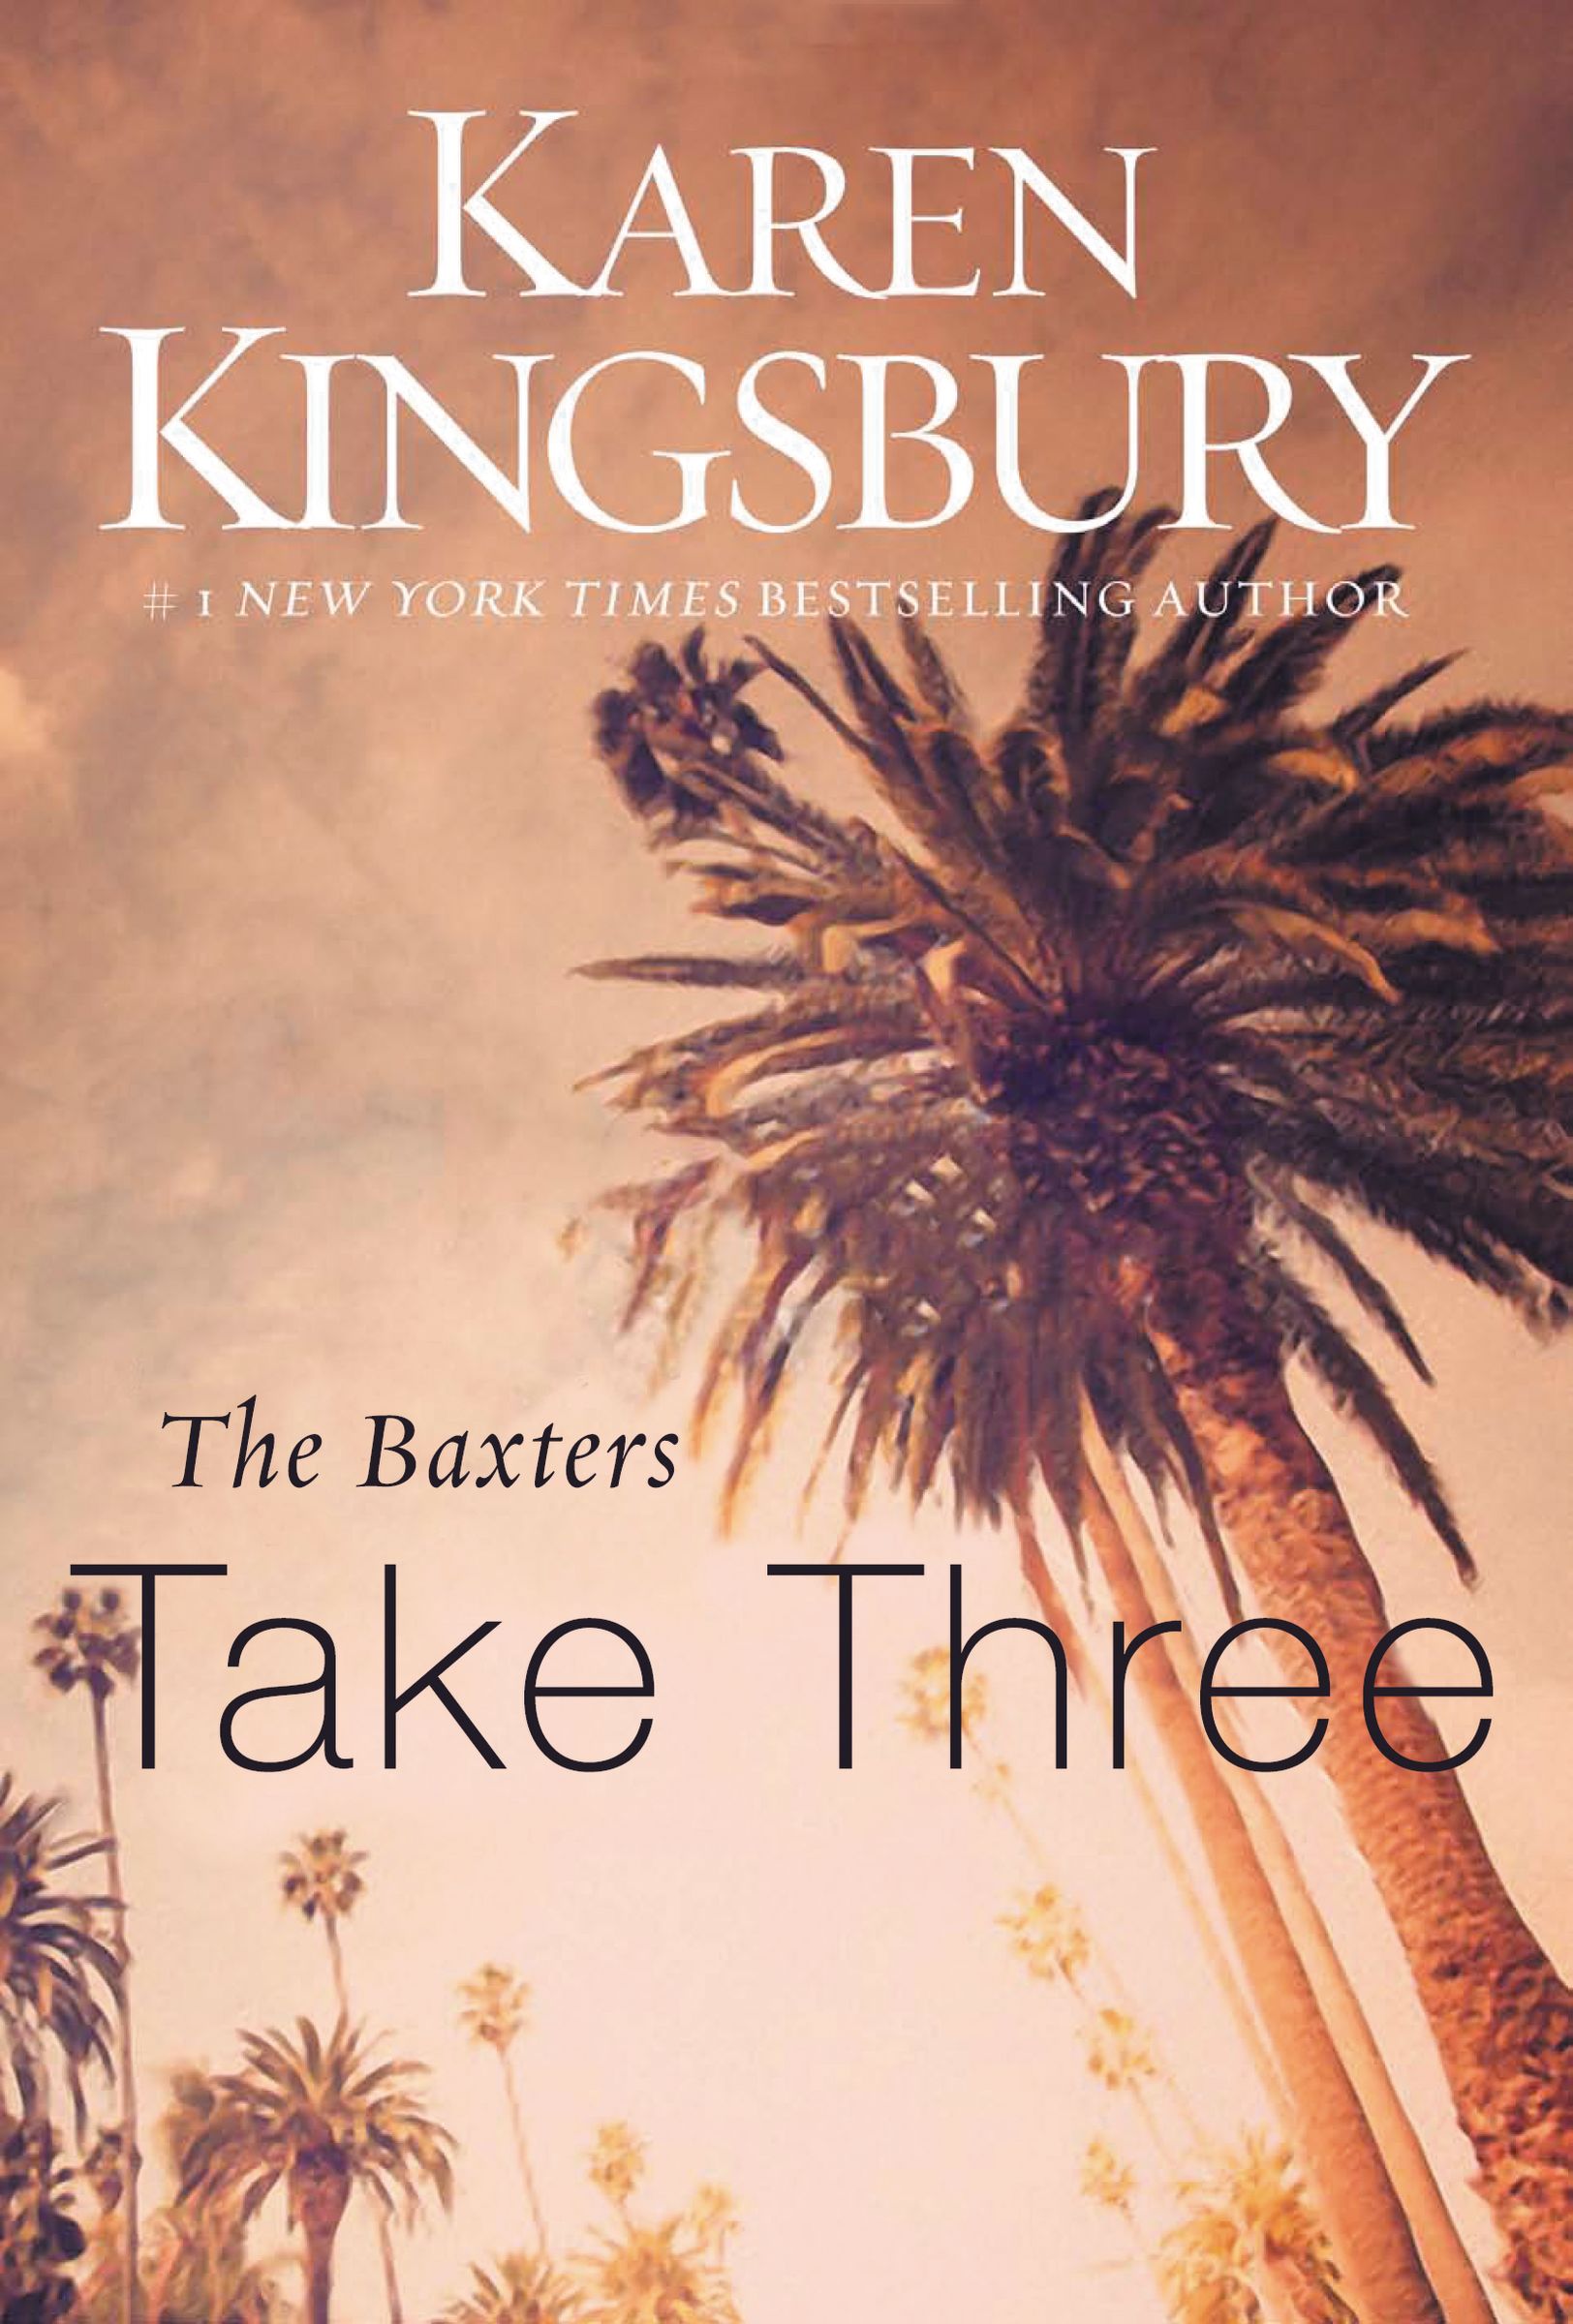 The Baxters Take Three by Karen Kingsbury Fast Delivery at Eden